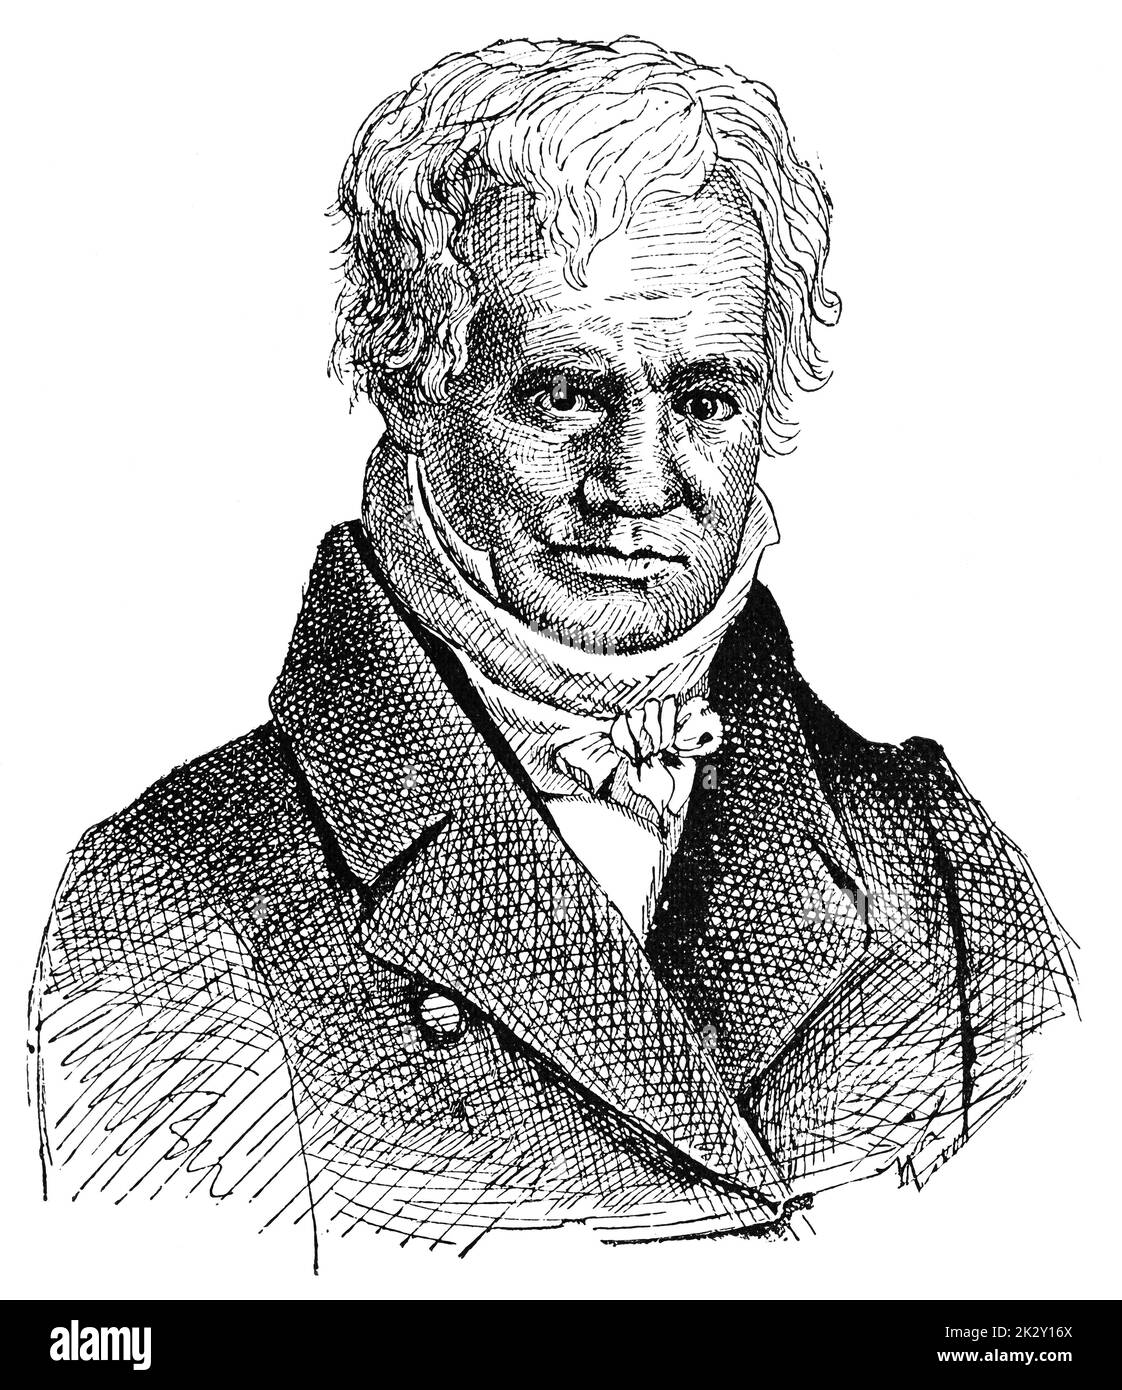 Portrait of Alexander von Humboldt - a German polymath, geographer, naturalist, explorer, and proponent of Romantic philosophy and science. Illustration of the 19th century. White background. Stock Photo